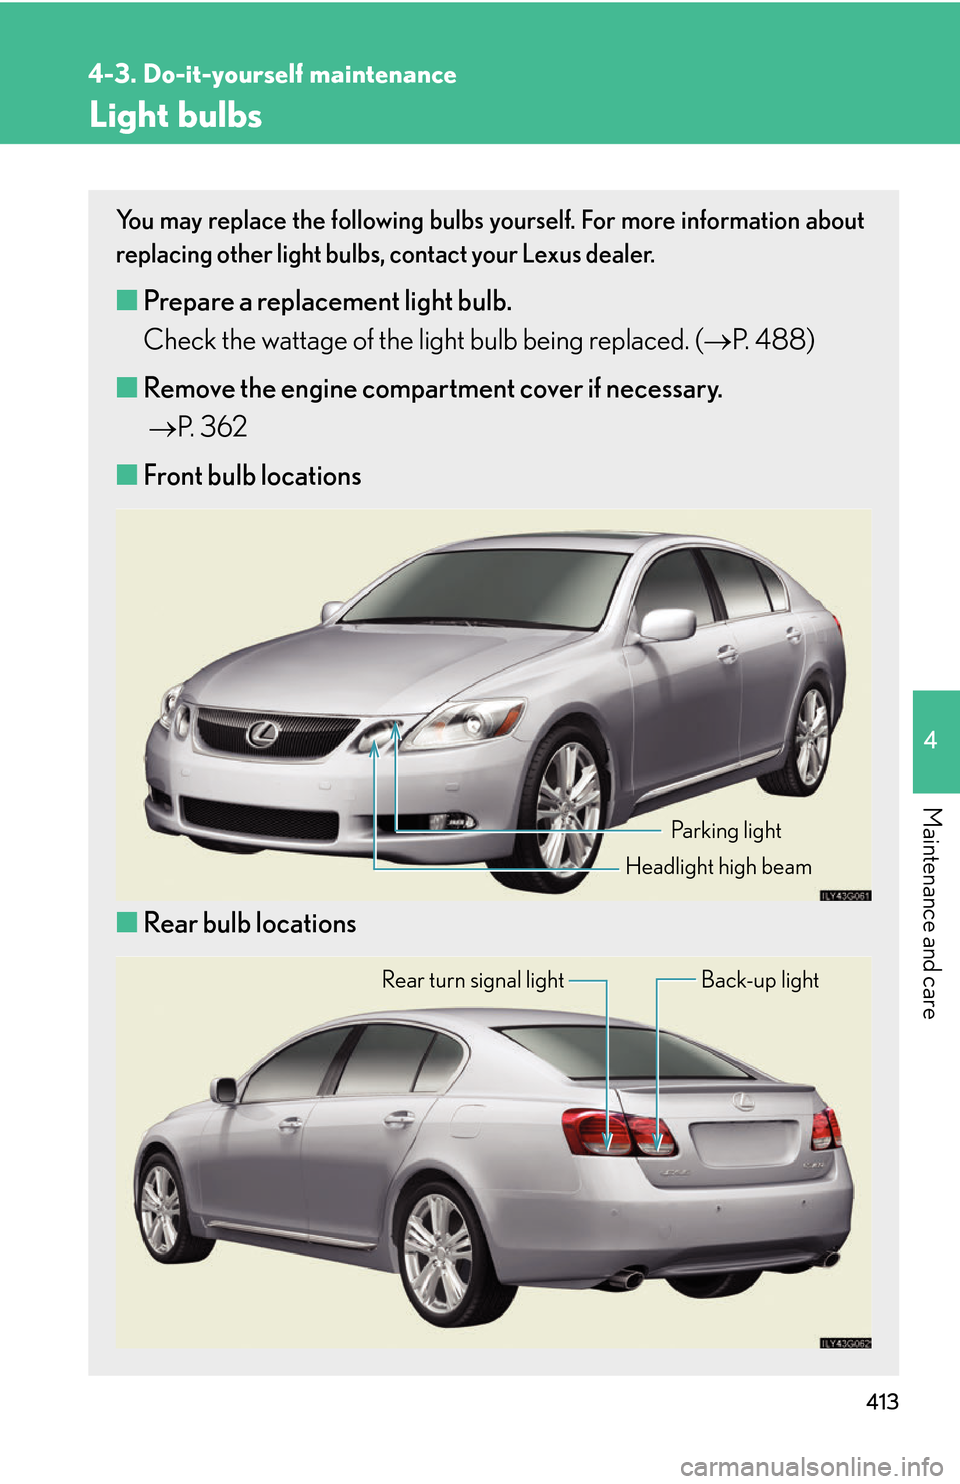 Lexus GS450h 2007  Do-it-yourself maintenance / LEXUS 2007 GS450H THROUGH JUNE 2006 PROD. OWNERS MANUAL (OM30727U) 413
4-3. Do-it-yourself maintenance
4
Maintenance and care
Light bulbs
You may replace the following bulbs yourself. For more information about 
replacing other light bulbs, contact your Lexus dealer.